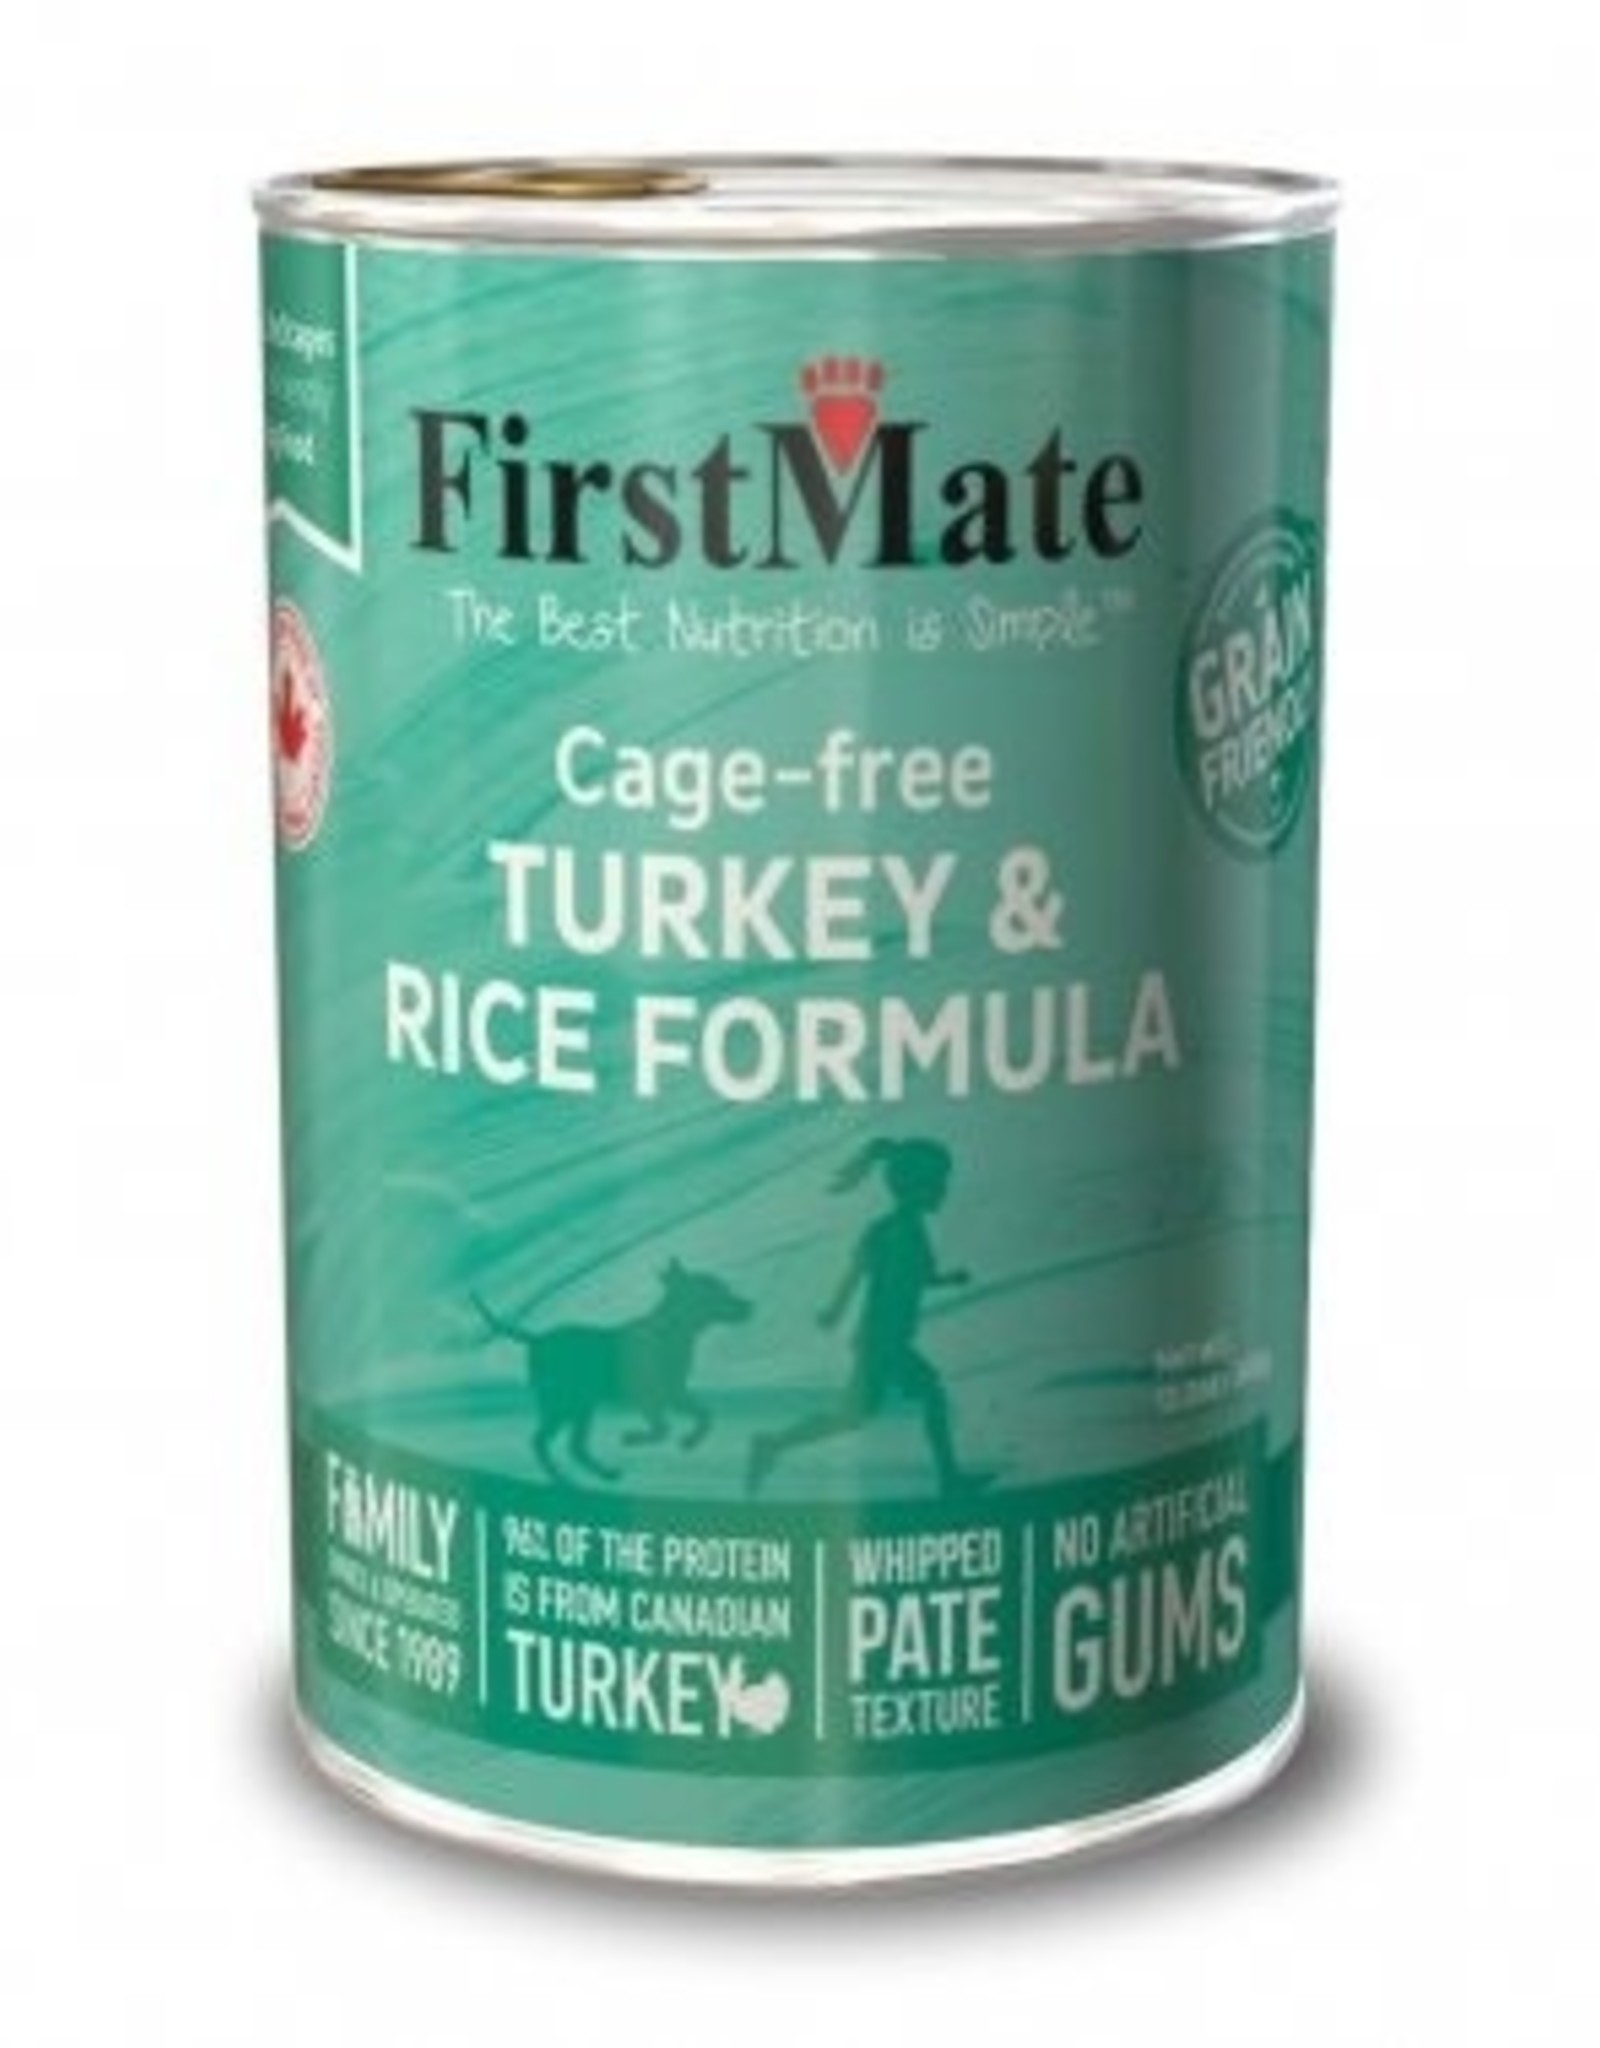 FirstMate First Mate Friendly Turkey and Rice Dog Food, 12.2oz